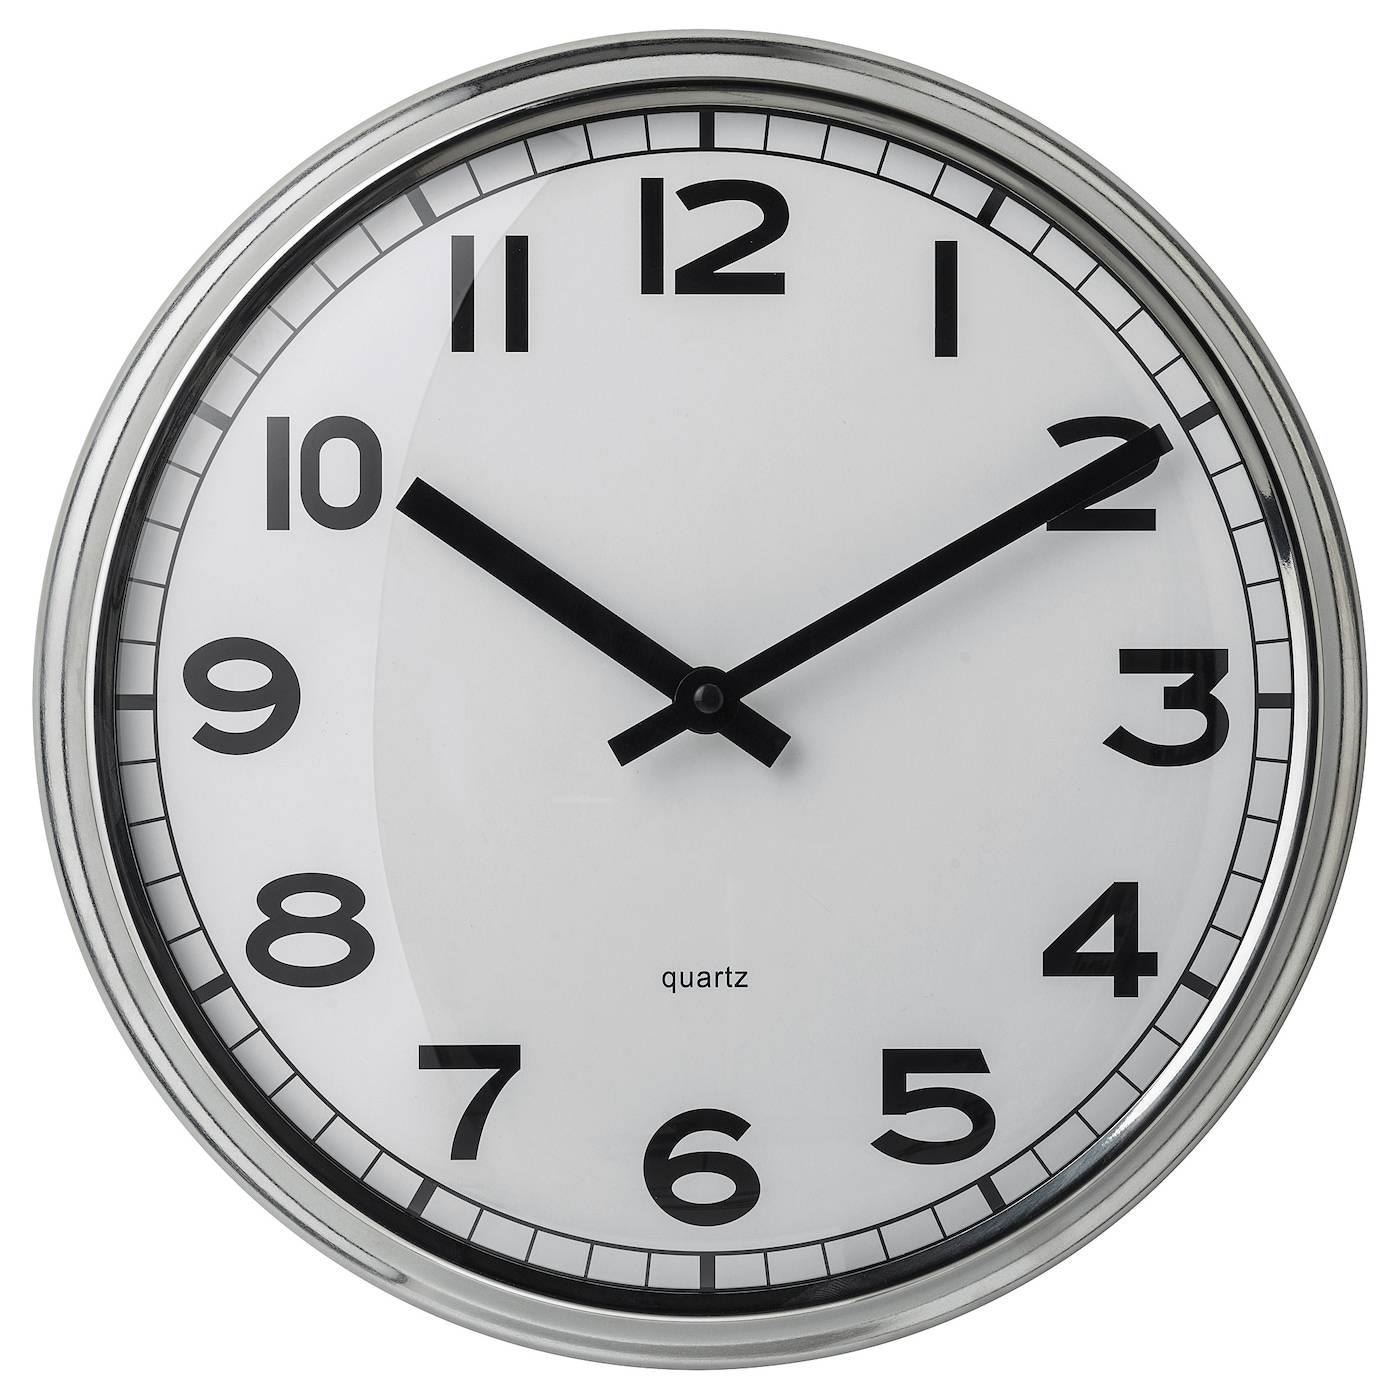 pugg-wall-clock-low-voltage-stainless-steel__0633562_pe695914_s5